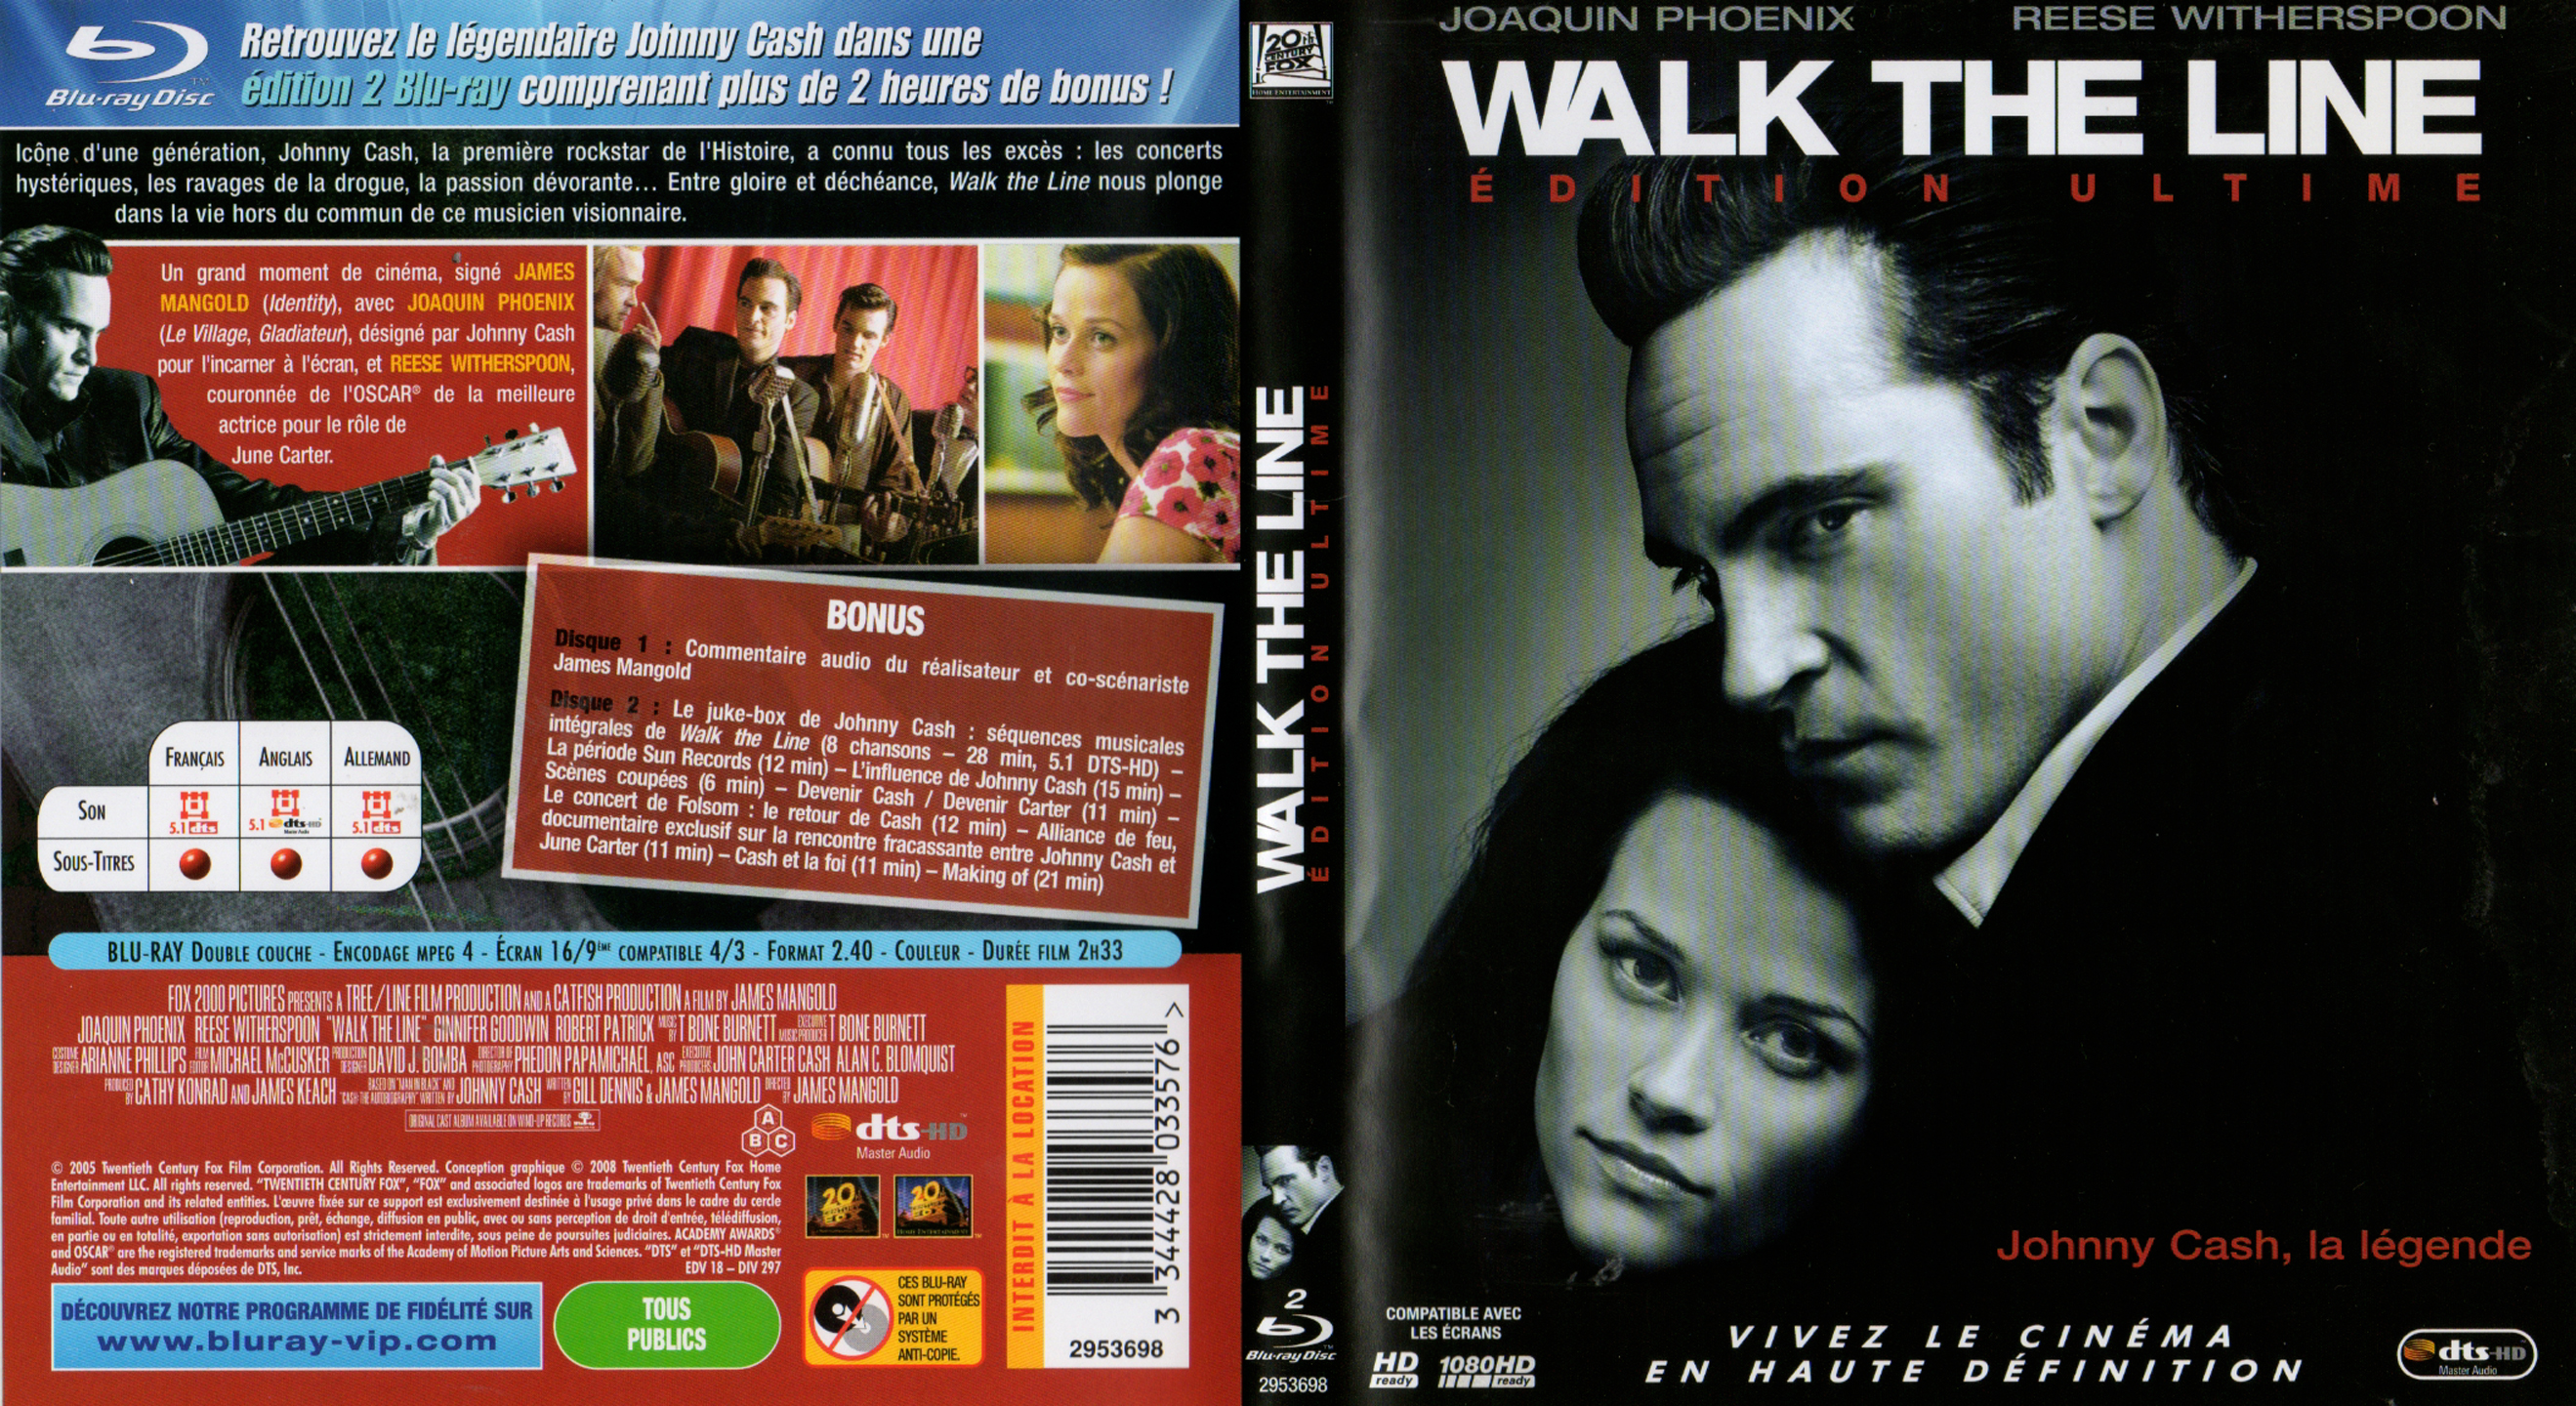 Jaquette DVD Walk the line (BLU-RAY) v2